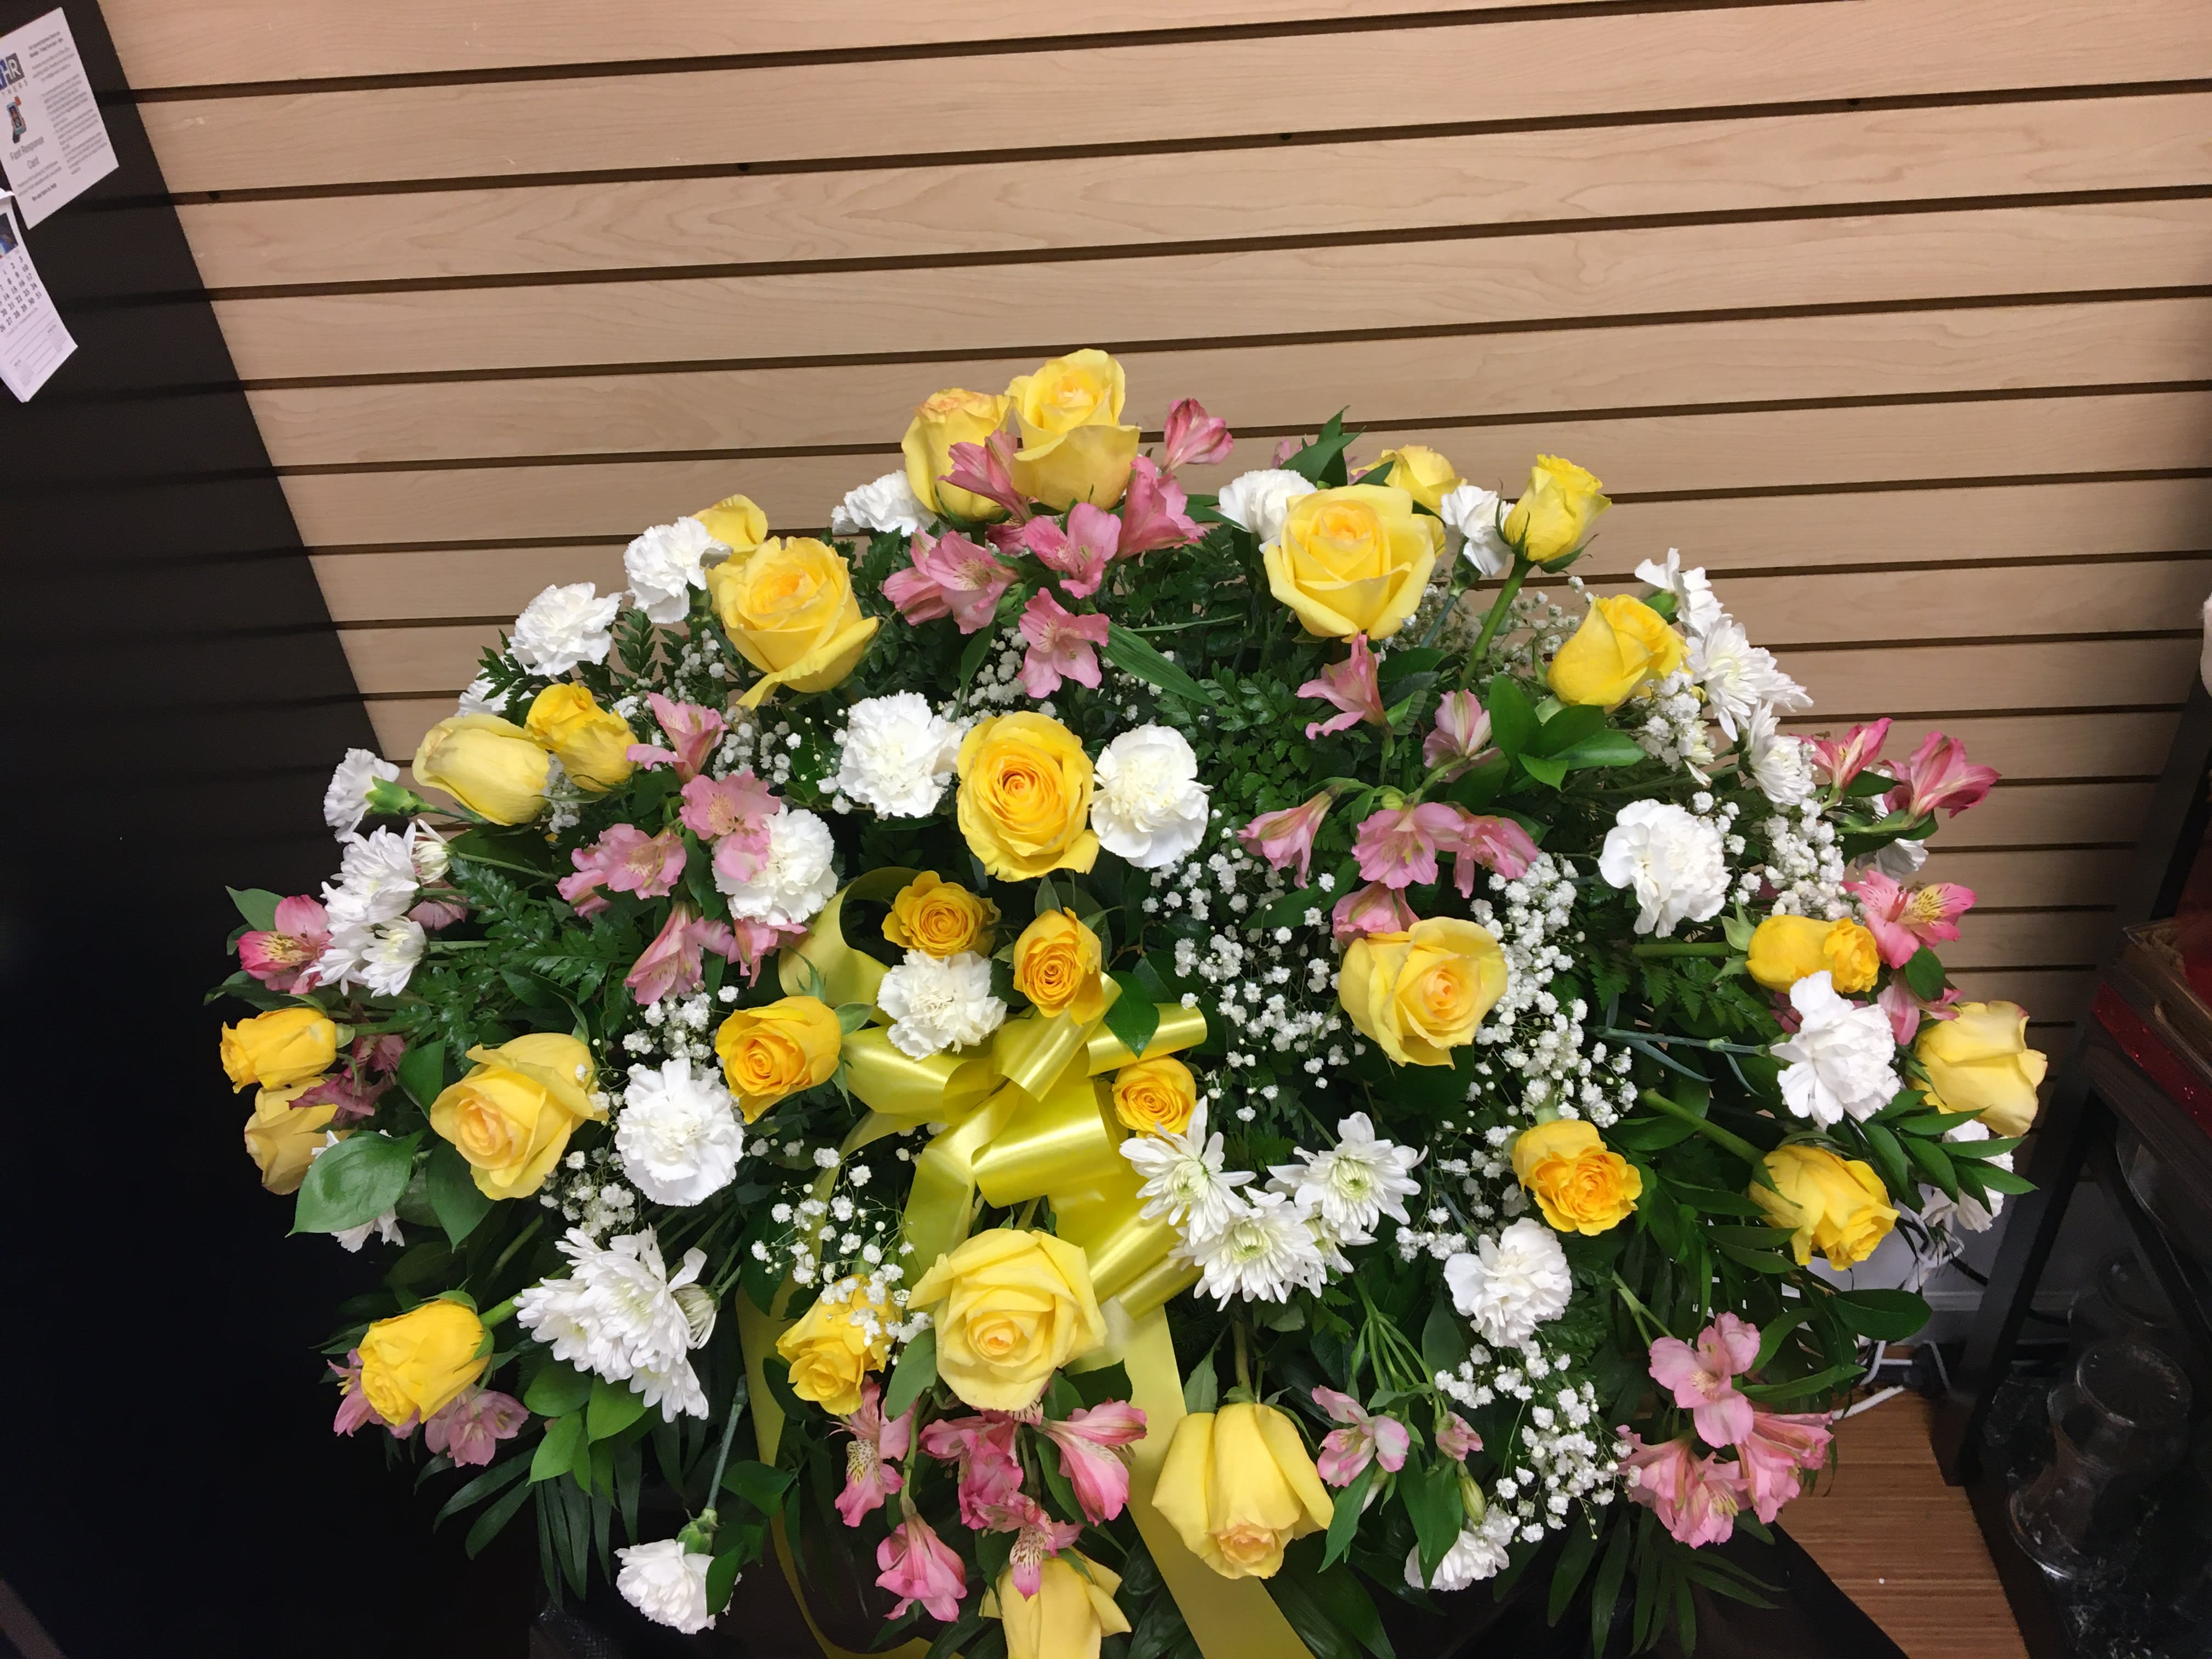 Saddle Casket Spray with Yellow Roses - Casket spray with white carnations, yellow roses, pink alstroemeria, and baby breathe